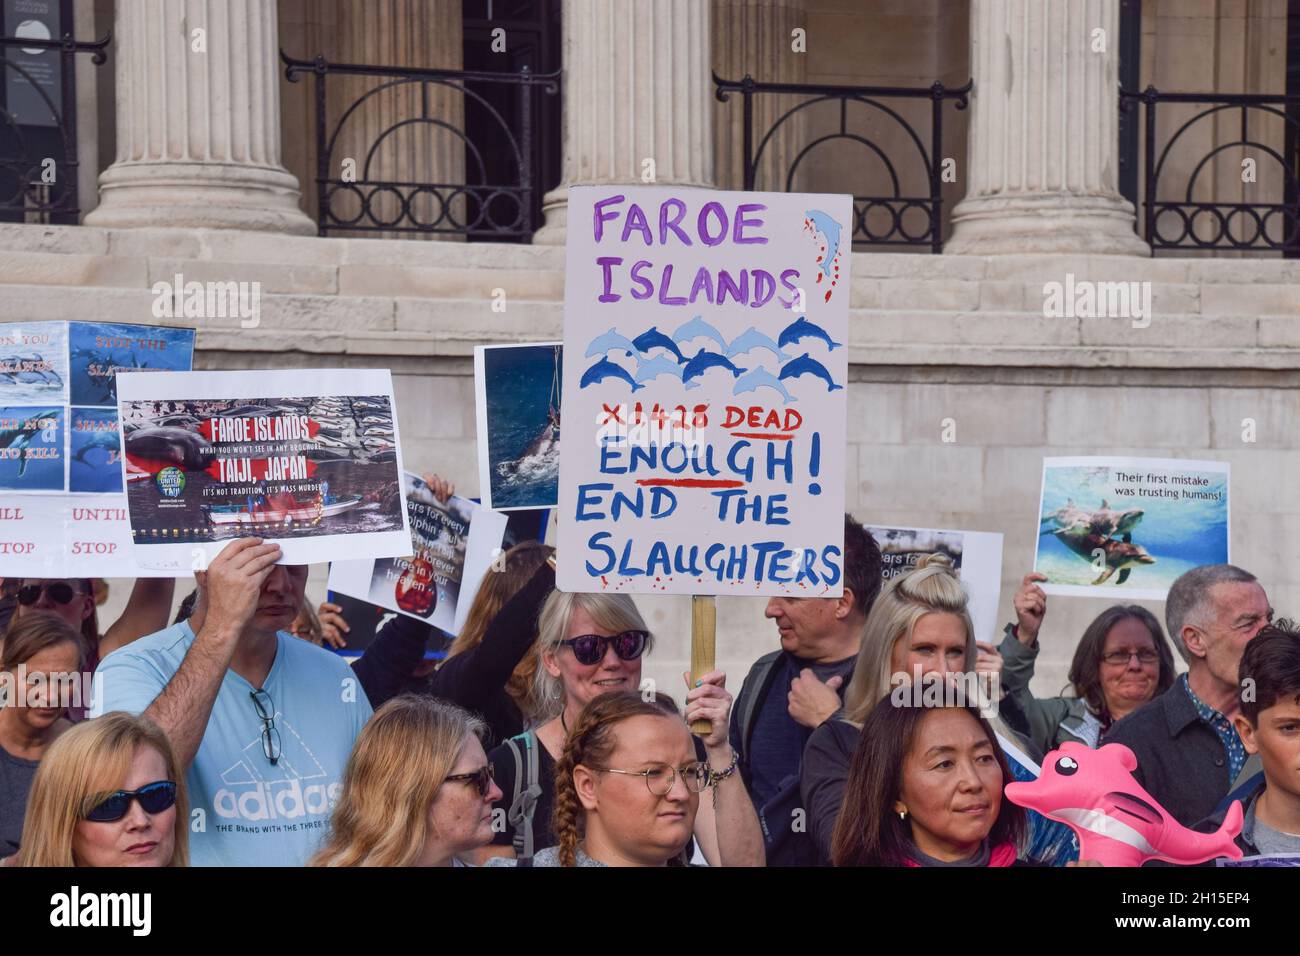 London, UK. 16th Oct, 2021. Protesters hold placards calling for an end to dolphin hunts during the demonstration in Trafalgar Square.Members of marine conservation organization Sea Shepherd and other activists marched through Westminster, calling for an end to the slaughter of dolphins in Faroe Islands and Taiji, Japan. (Photo by Vuk Valcic/SOPA Images/Sipa USA) Credit: Sipa USA/Alamy Live News Stock Photo